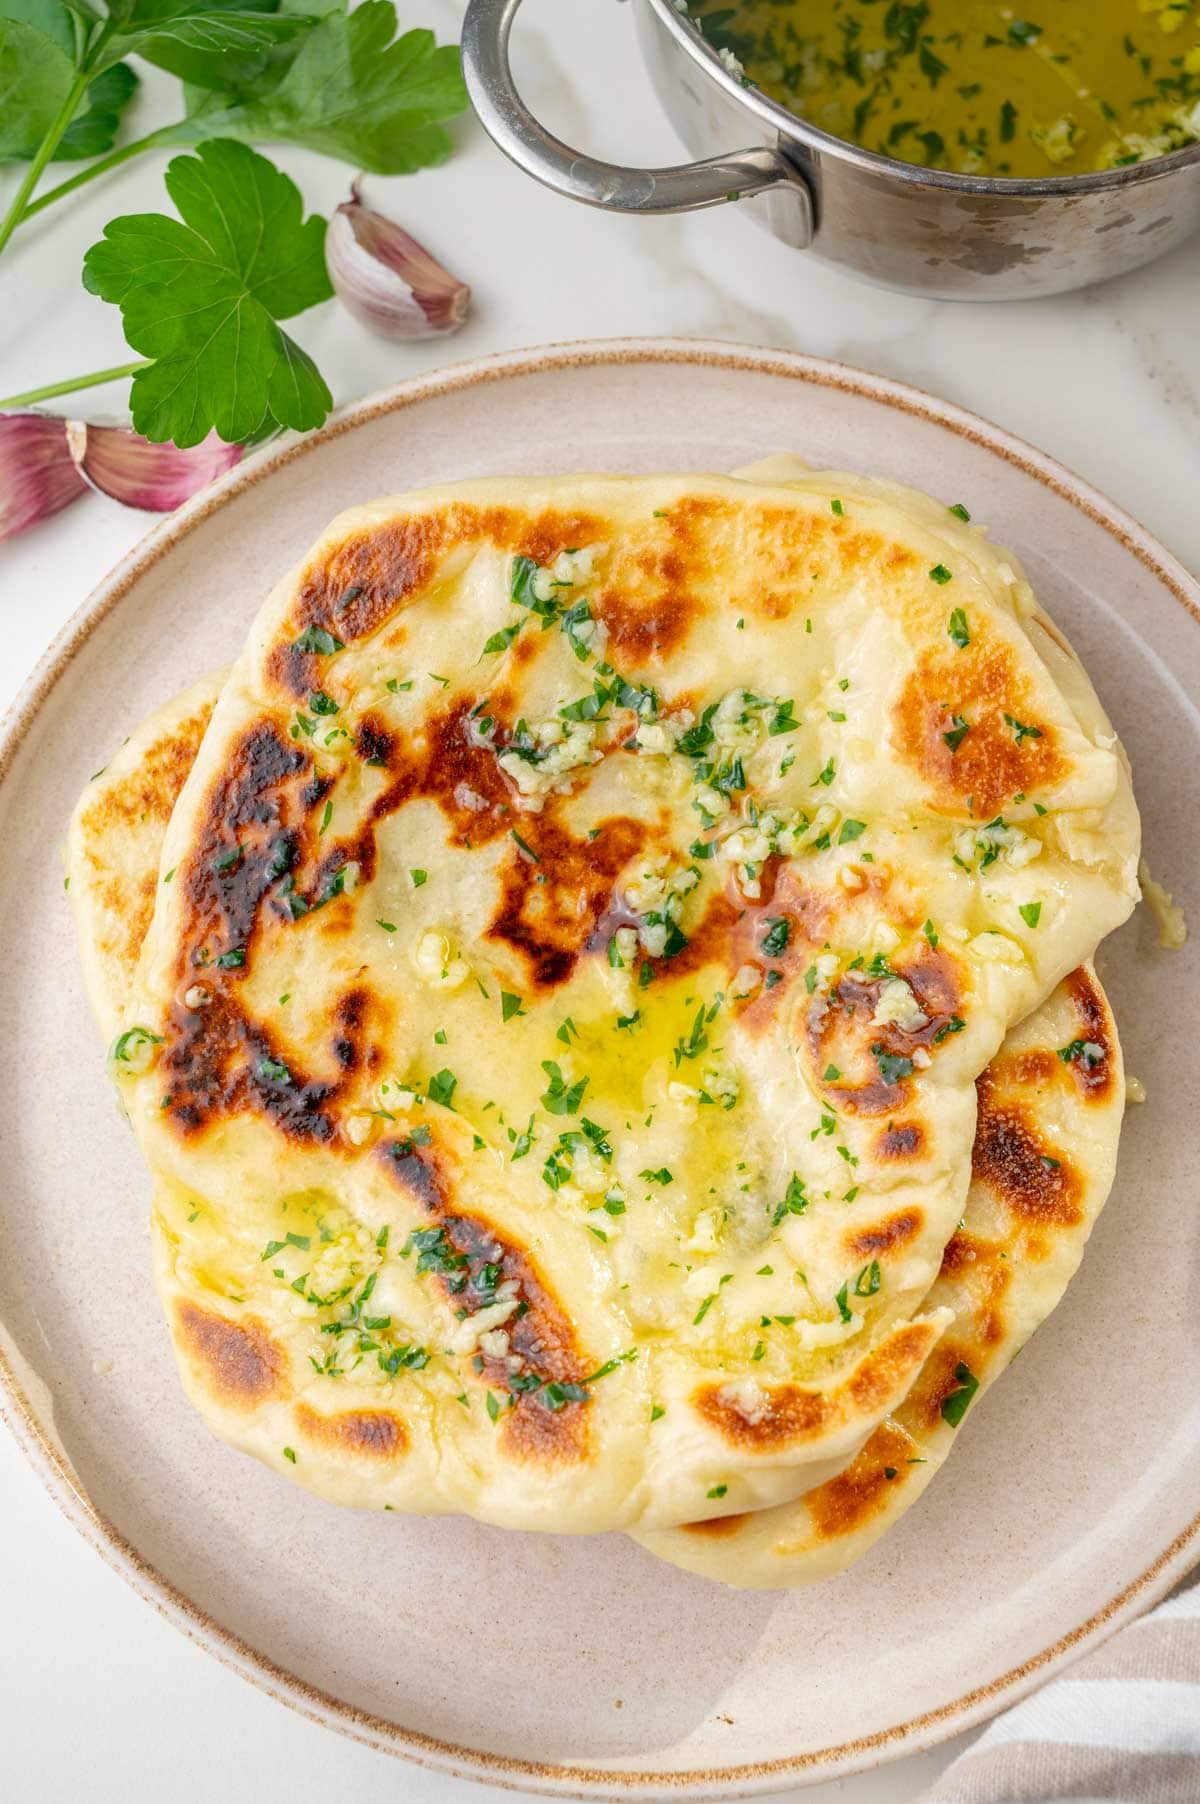 A stack of Naan bread with garlic butter on a beige plate.